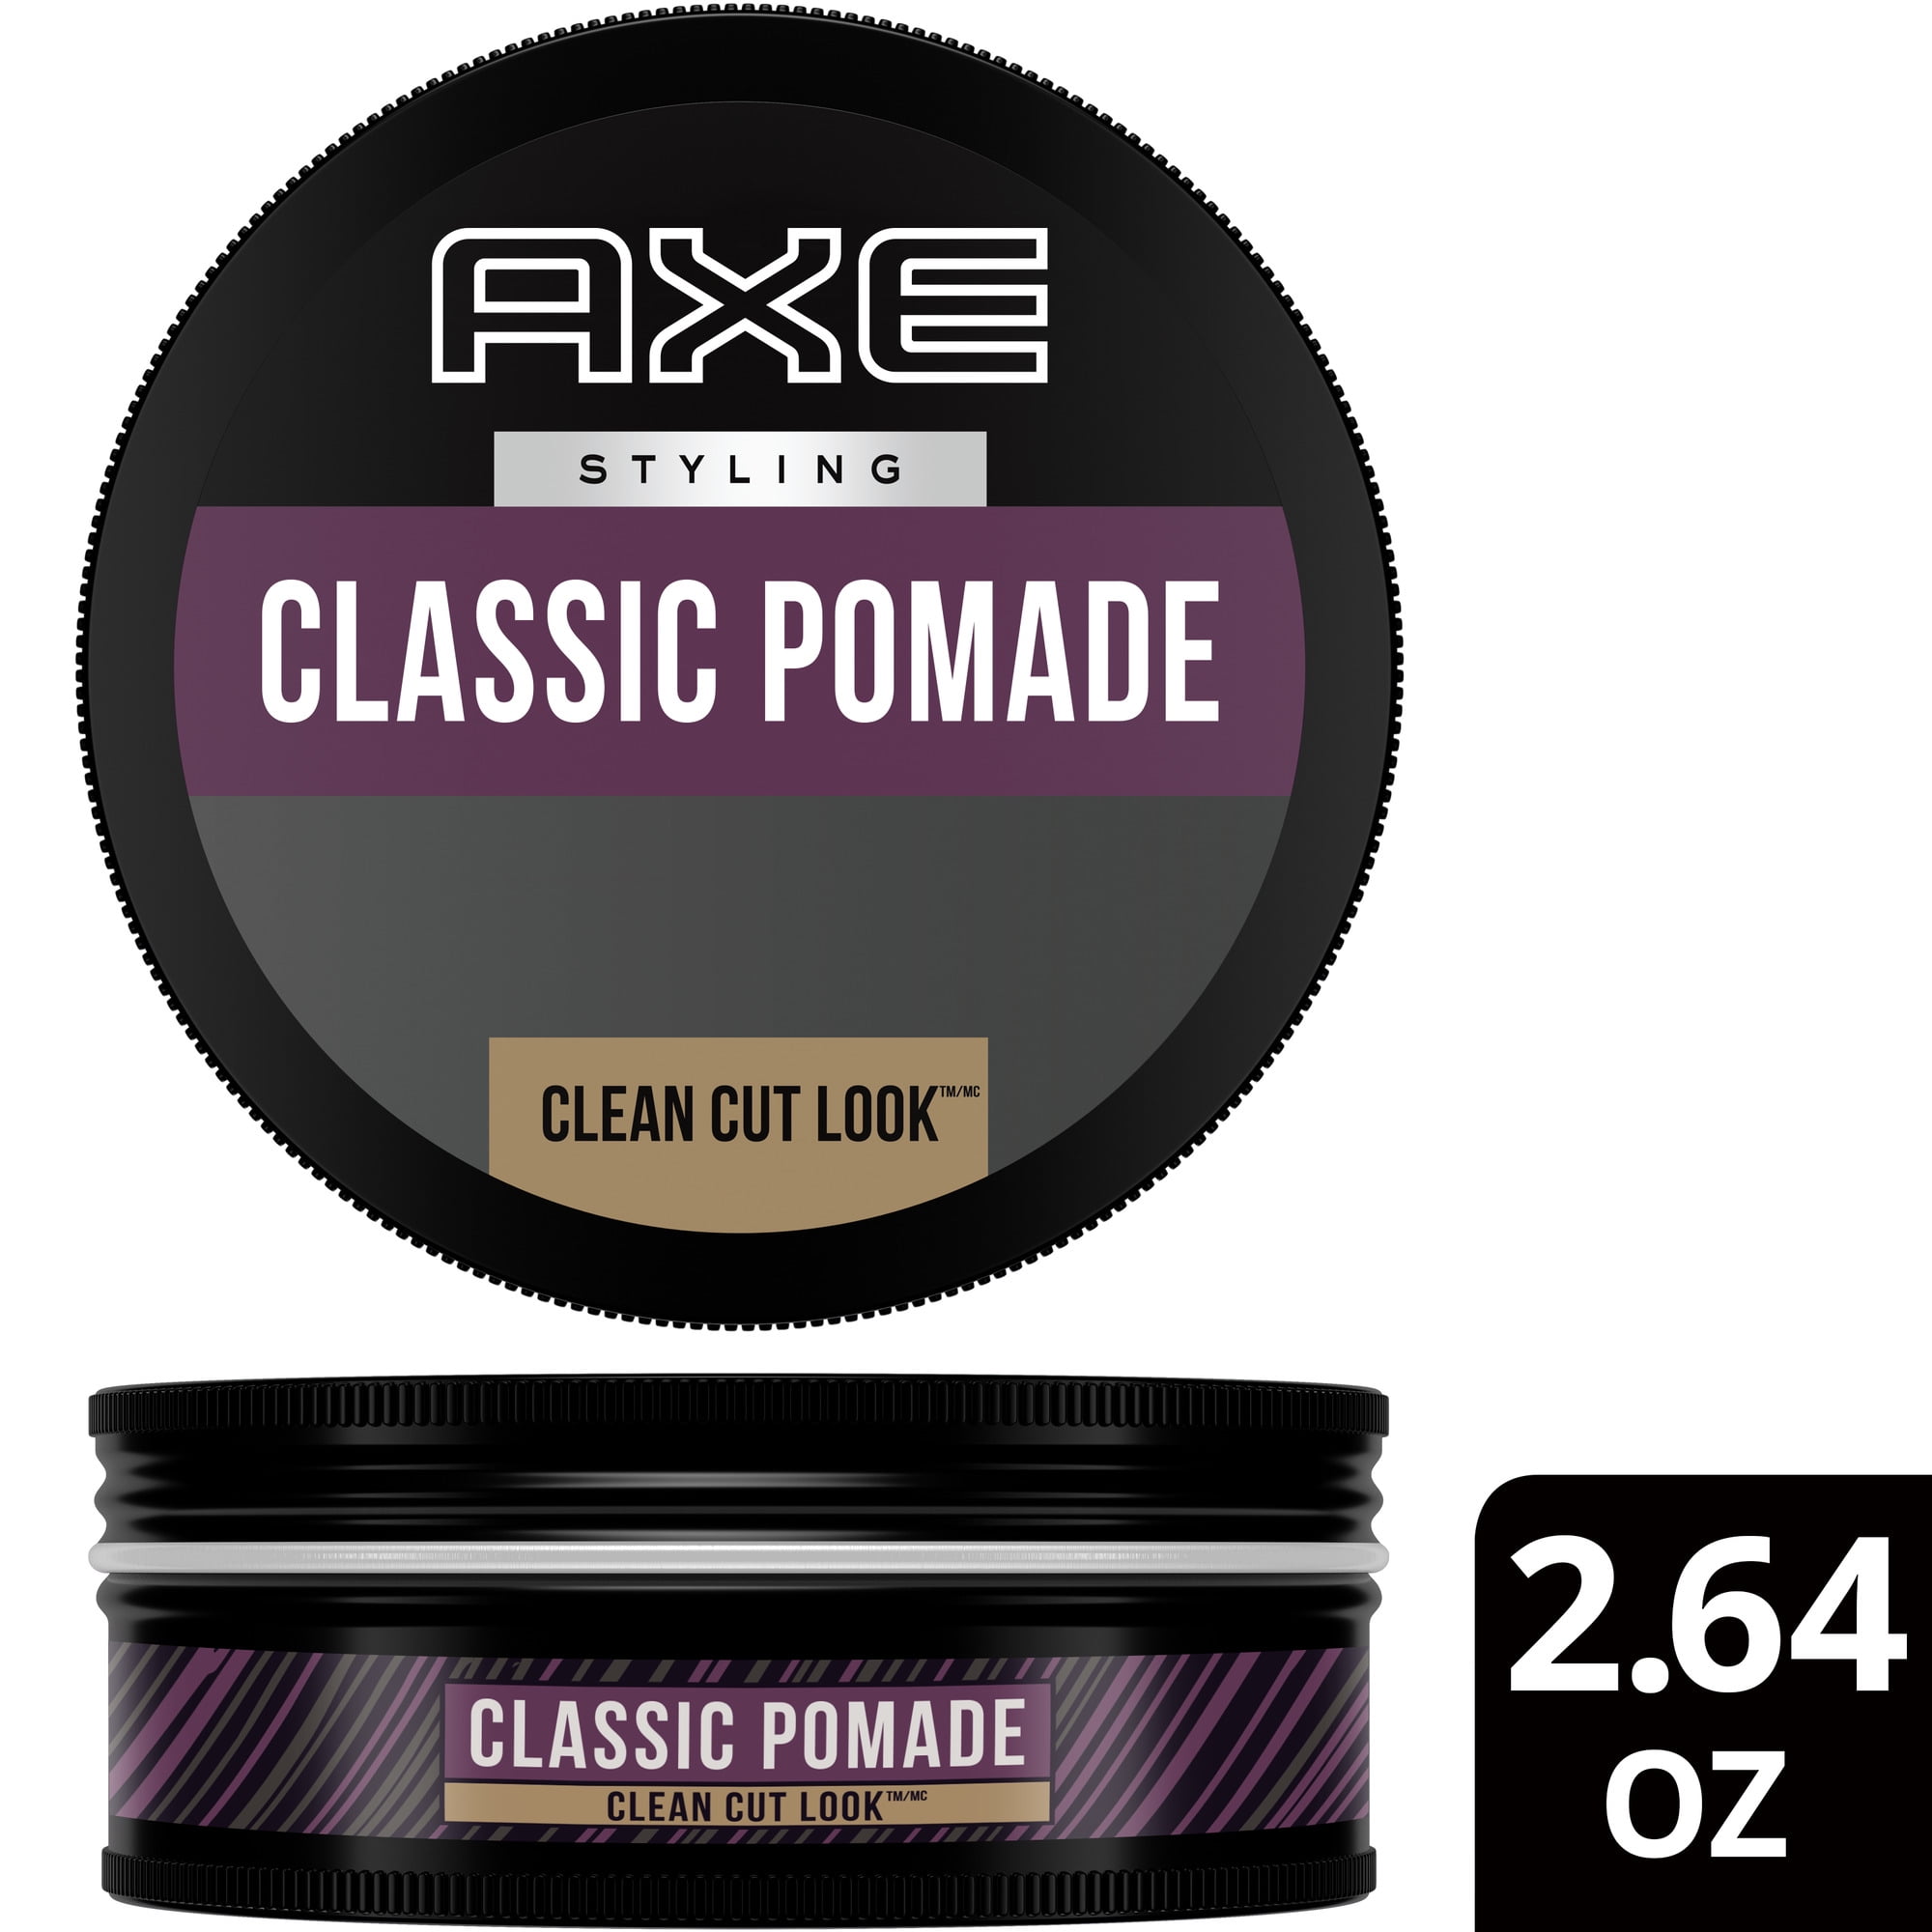 AXE Styling Pomade, Clean Cut Look Medium Hold High Shine for Short to Mid-Length Hair, 2.64 oz